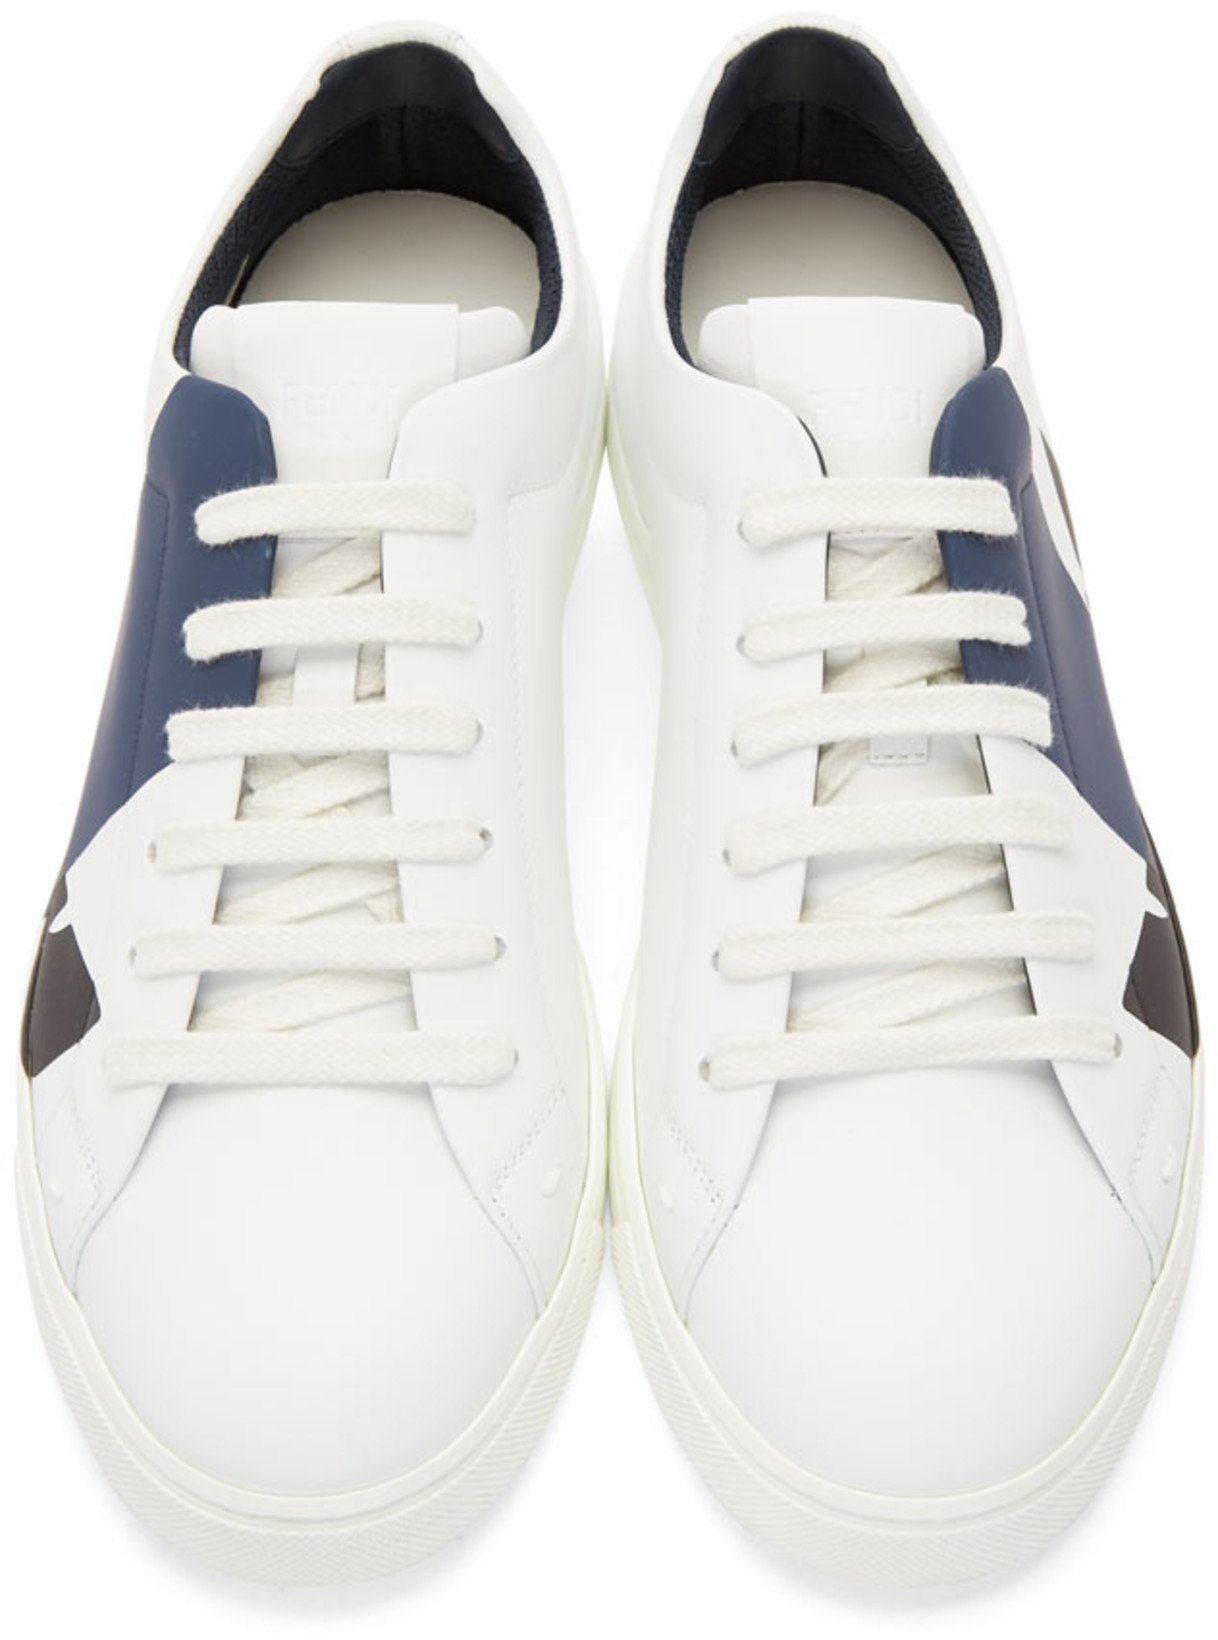 Fendi Leather 'Bag Bugs' Sneakers 'White & Navy'